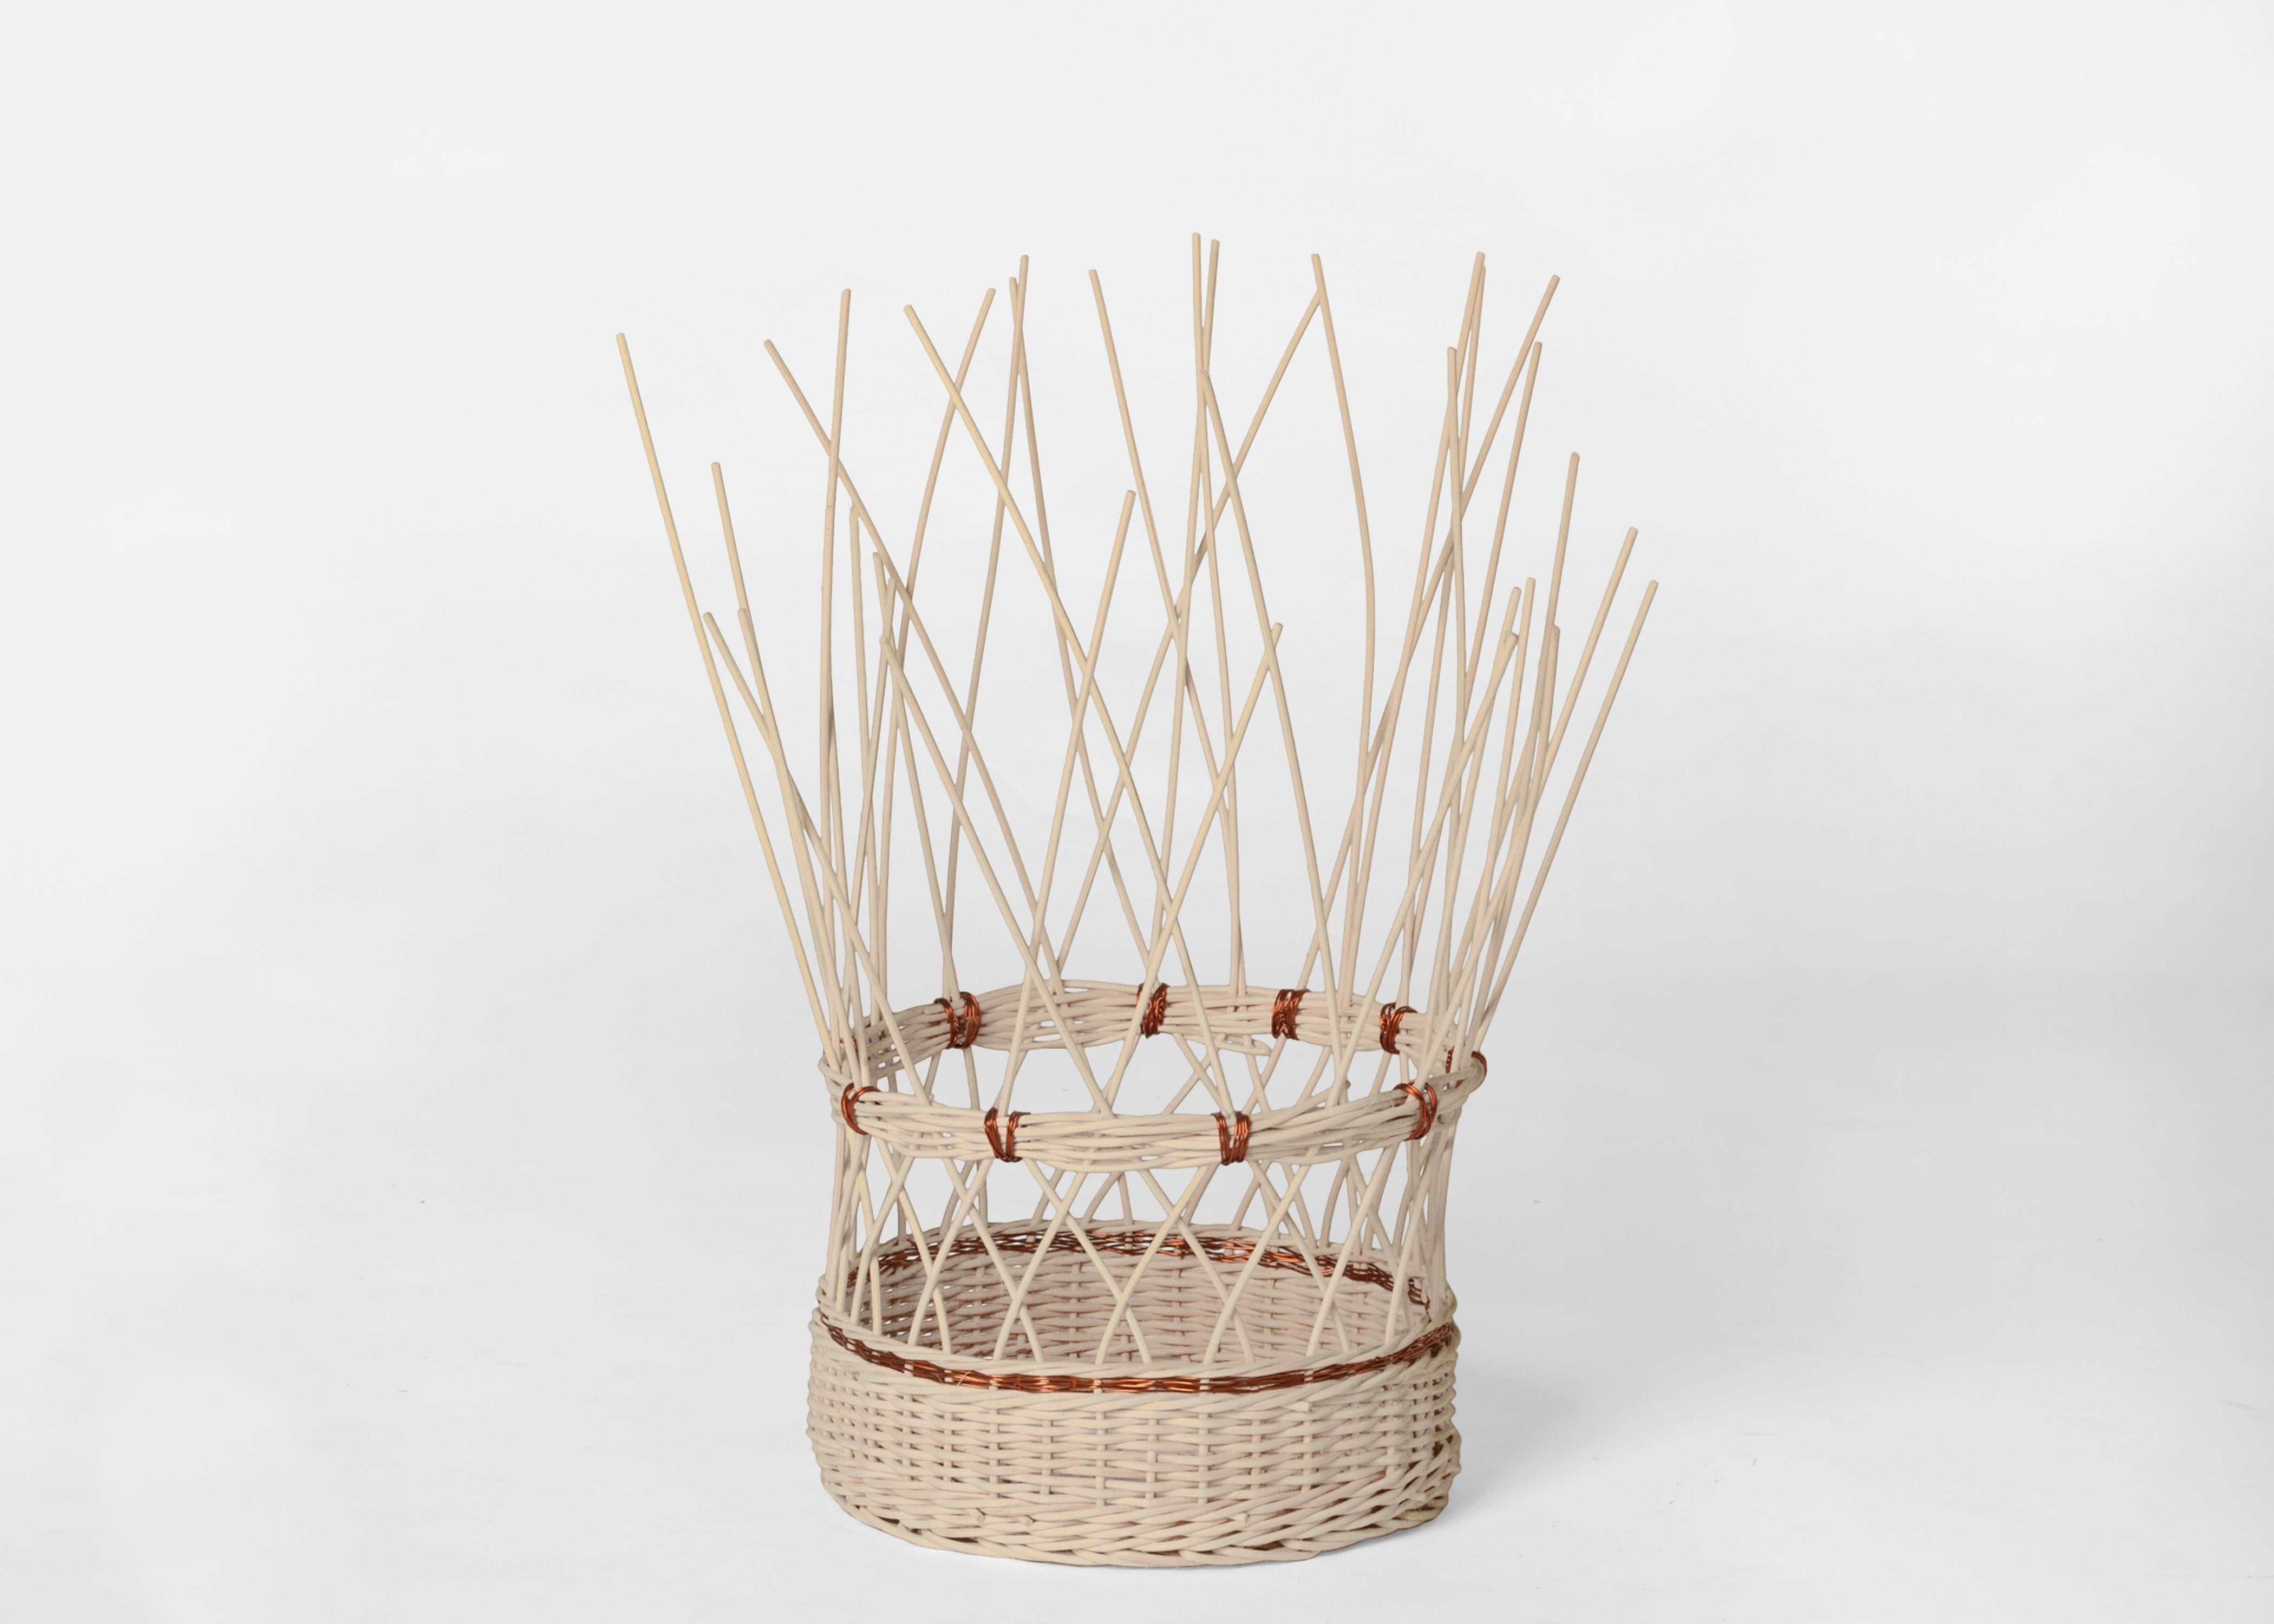 Small voodoo basket by Edizione Limitata
Limited Edition. Signed and numbered.
Designers: Simone Fanciullacci
Dimensions: H 40 × W 25 × L 25 cm
Materials: handwoven rattan, copper wire

Edizione Limitata, that is to say “Limited Edition”, is a brand